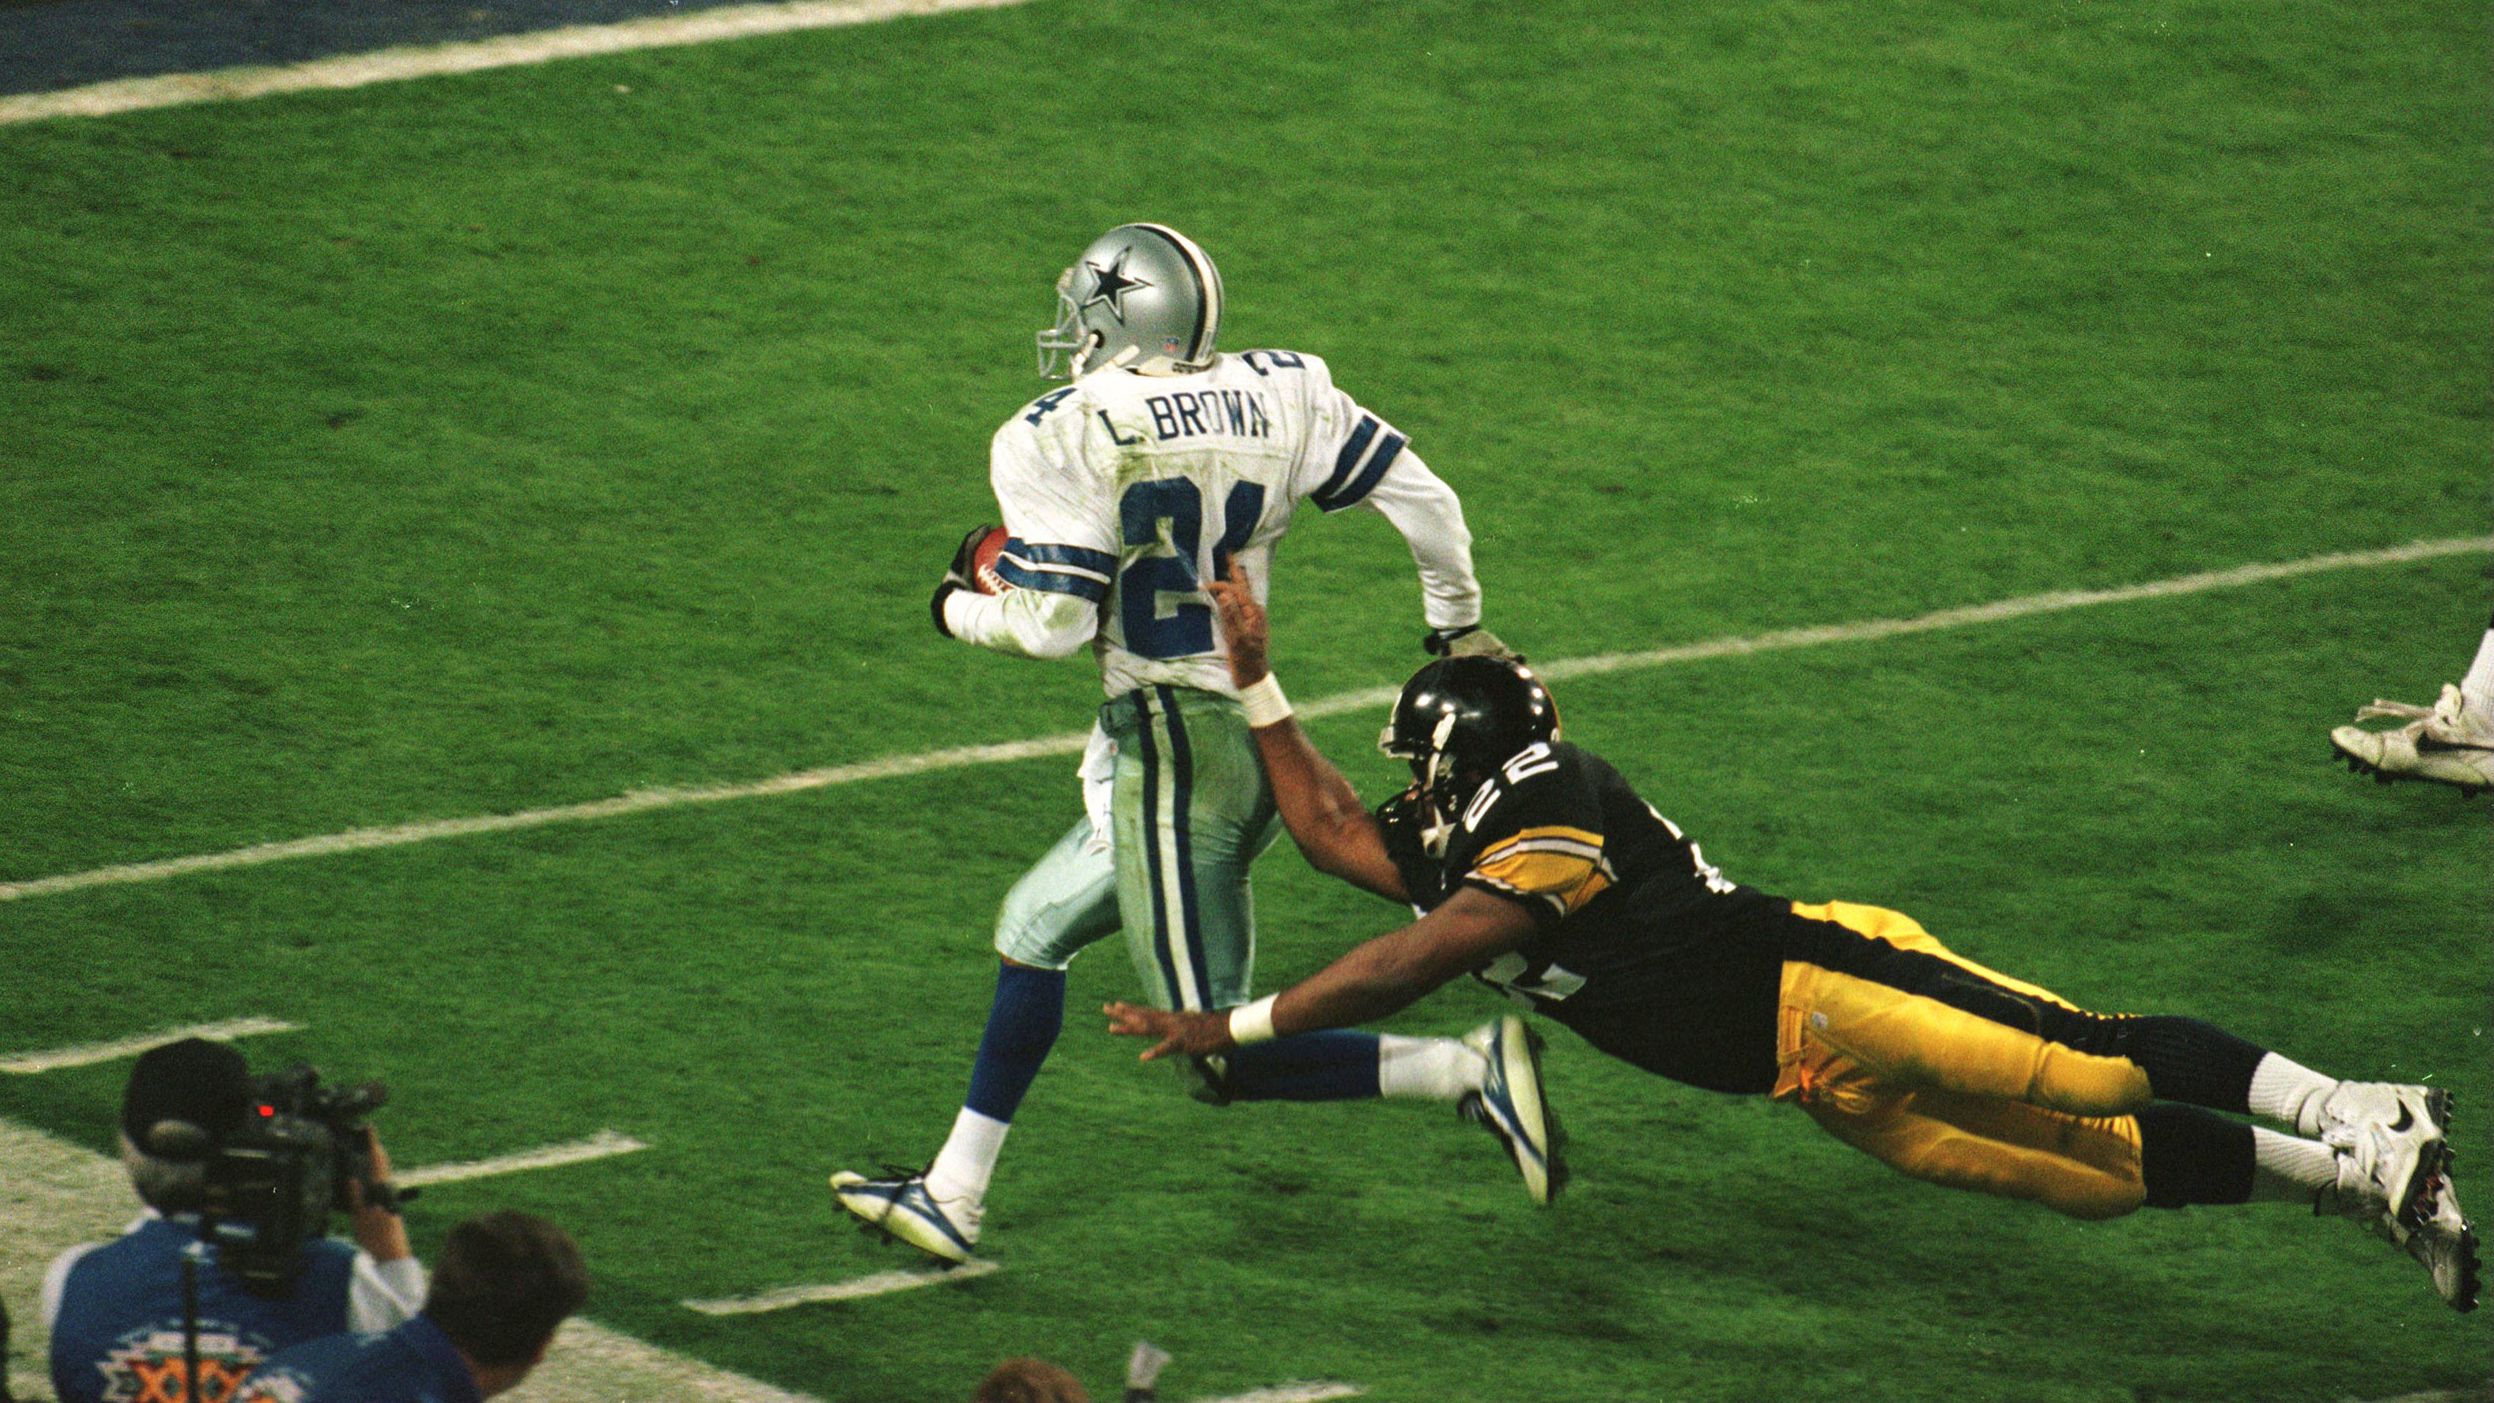 <strong>Super Bowl XXX (1996):</strong> Dallas Cowboys cornerback Larry Brown is pushed out of bounds after one of his two interceptions in Super Bowl XXX. Brown's MVP efforts helped the Cowboys beat Pittsburgh 27-17 for their third championship in four years.